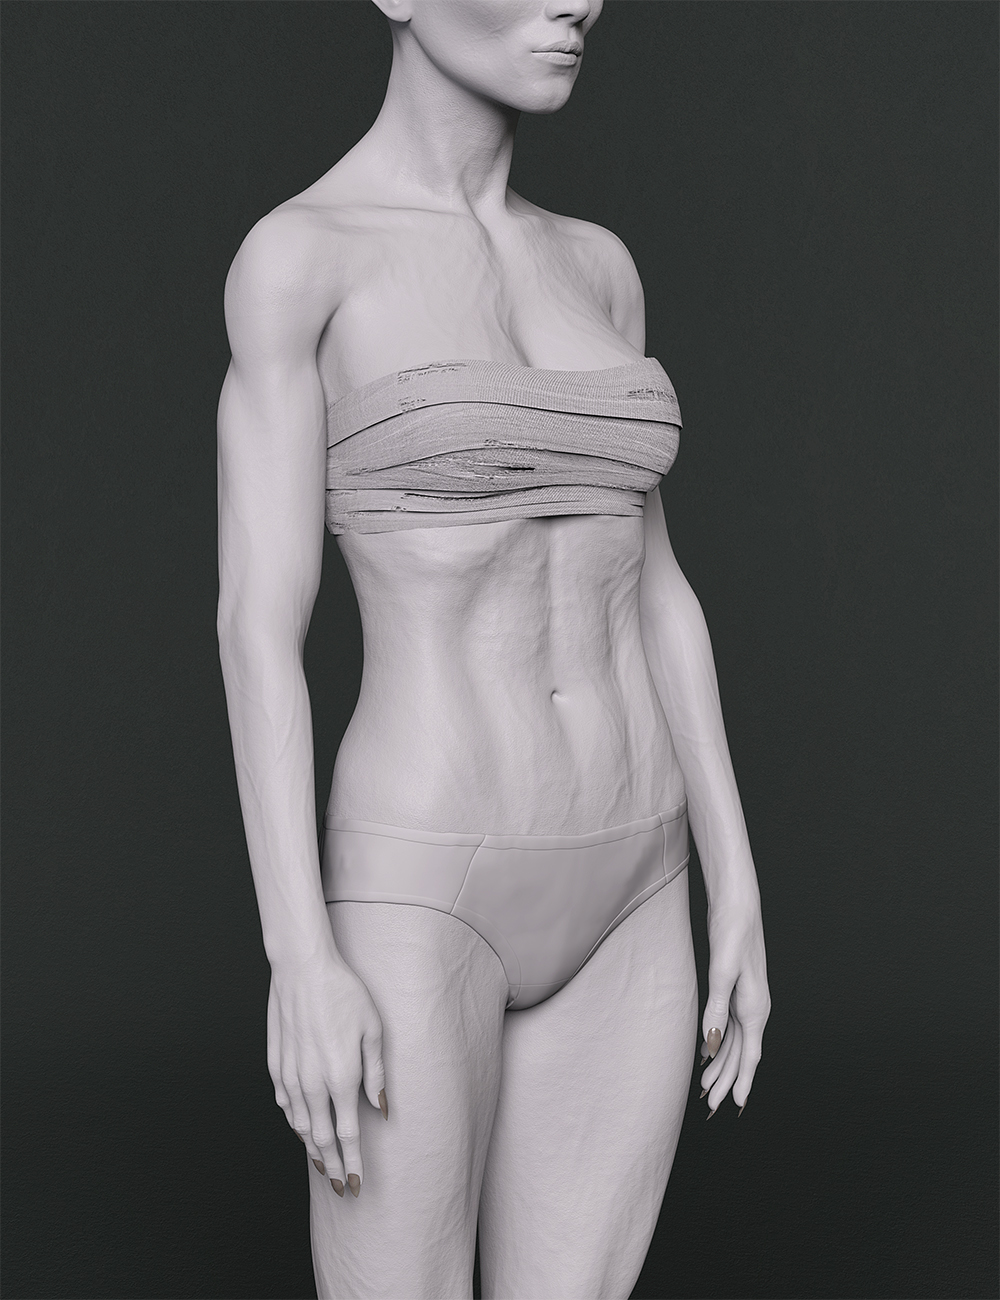 What cloth asset used to wrap chest/breast for this promo image by Kooki99?  - Daz 3D Forums